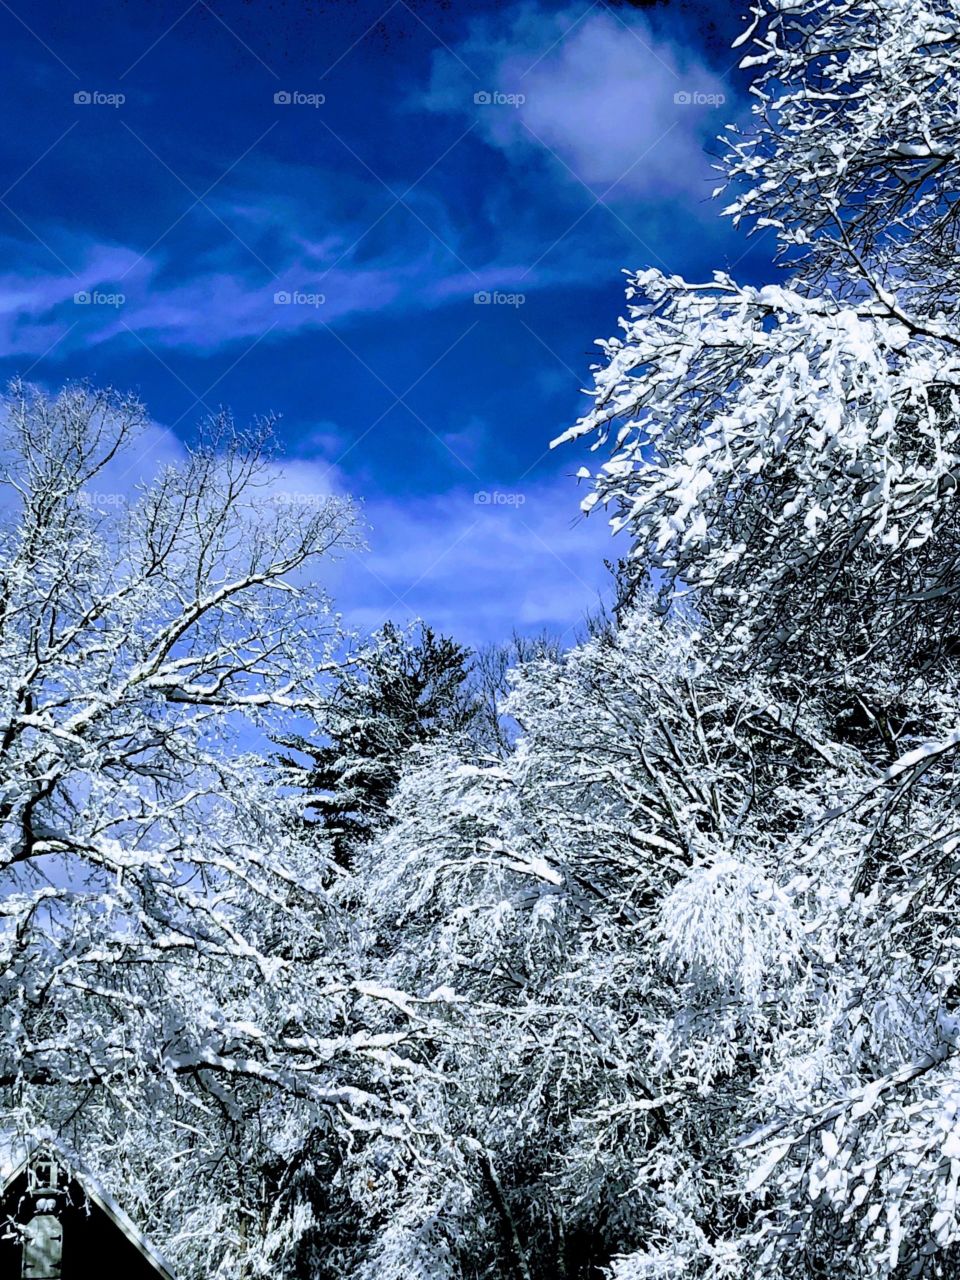 Snowcovered treetop branches set against a deep blue skyscape